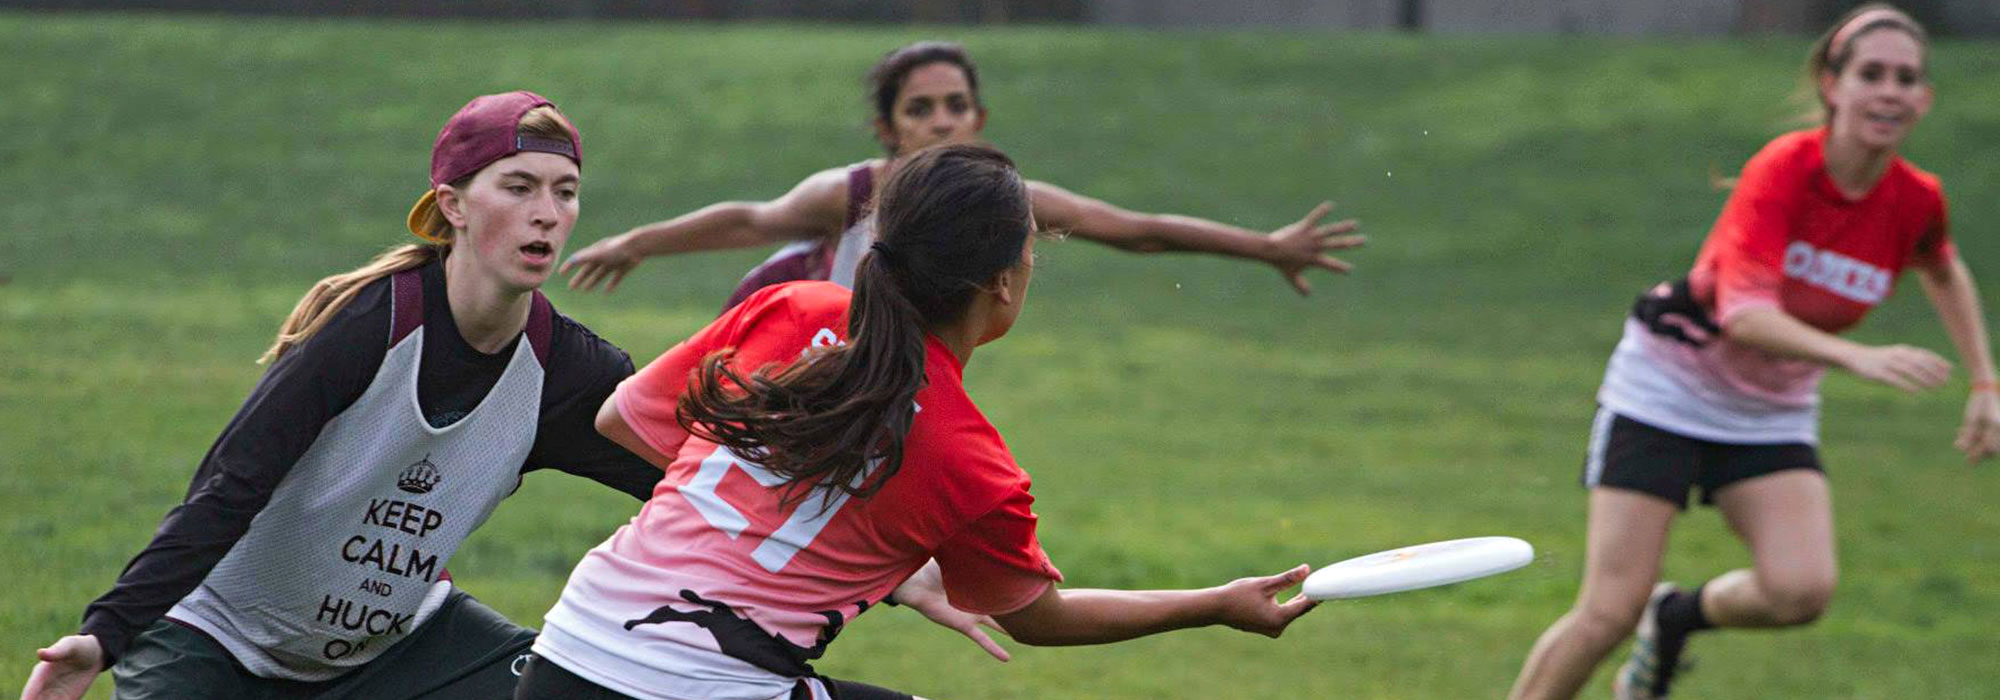 About the Women's Ultimate Frisbee Club Sport Clubs Aztec